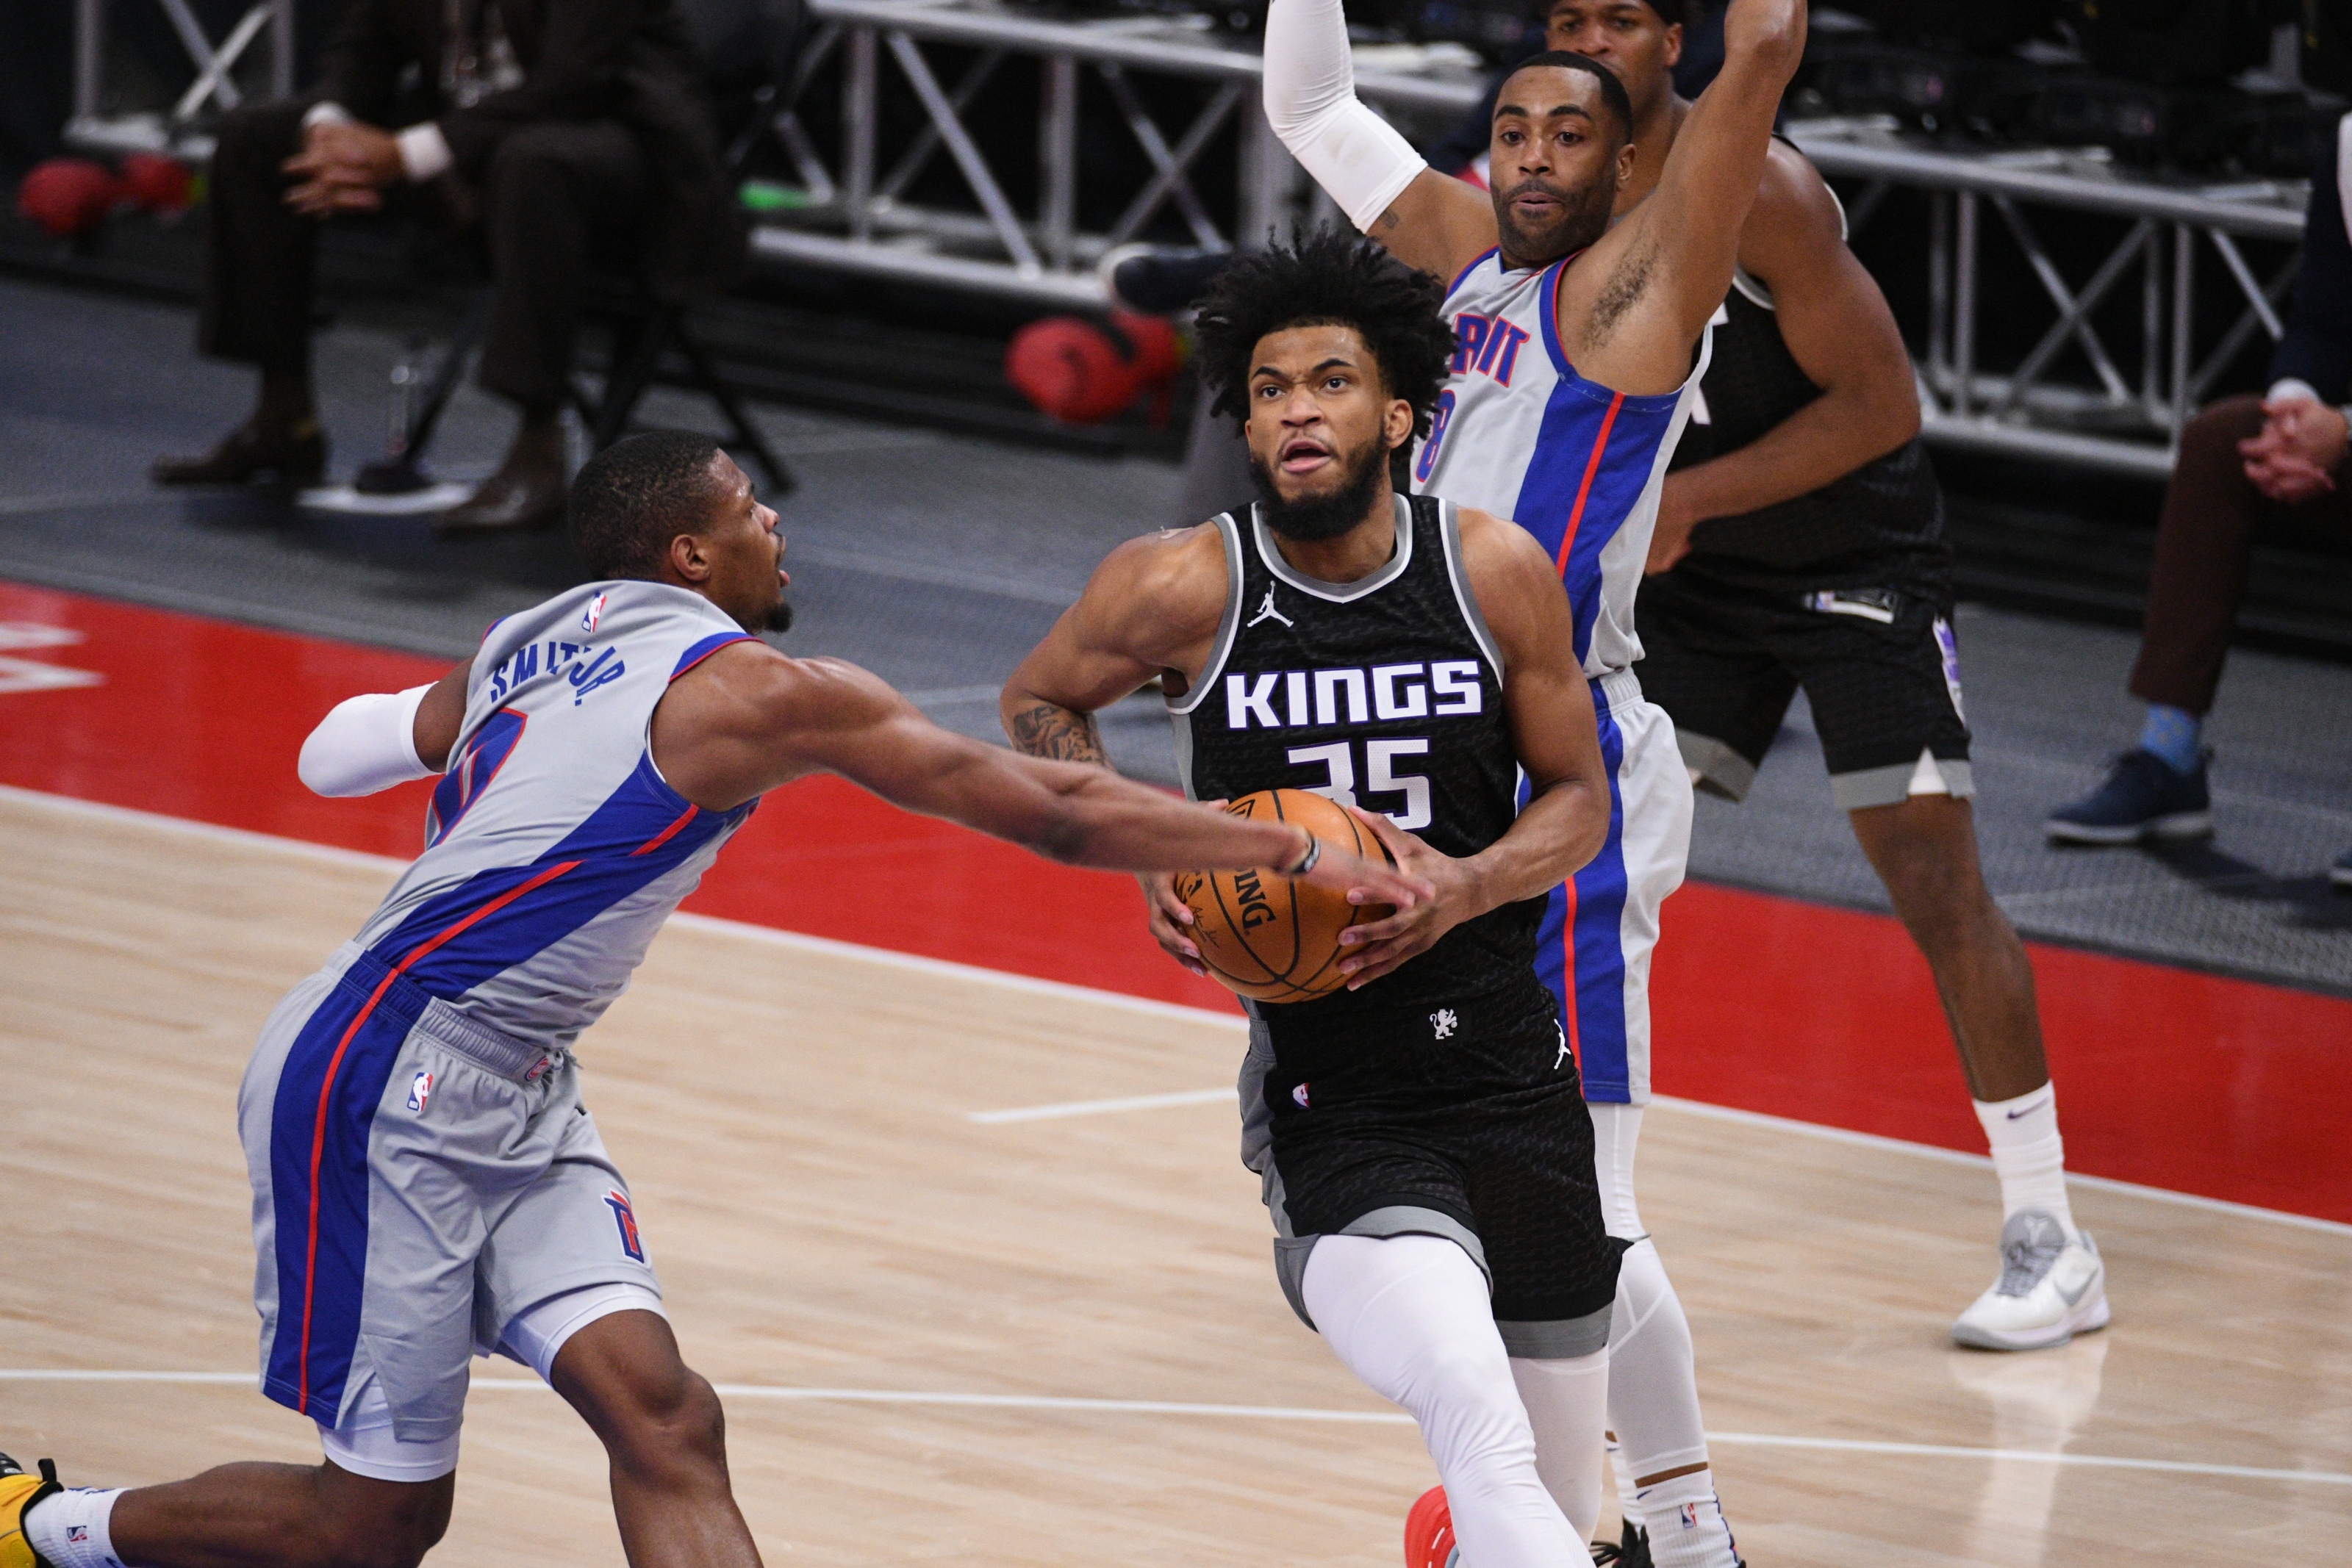 Marvin Bagley III's energy impresses Pistons during debut